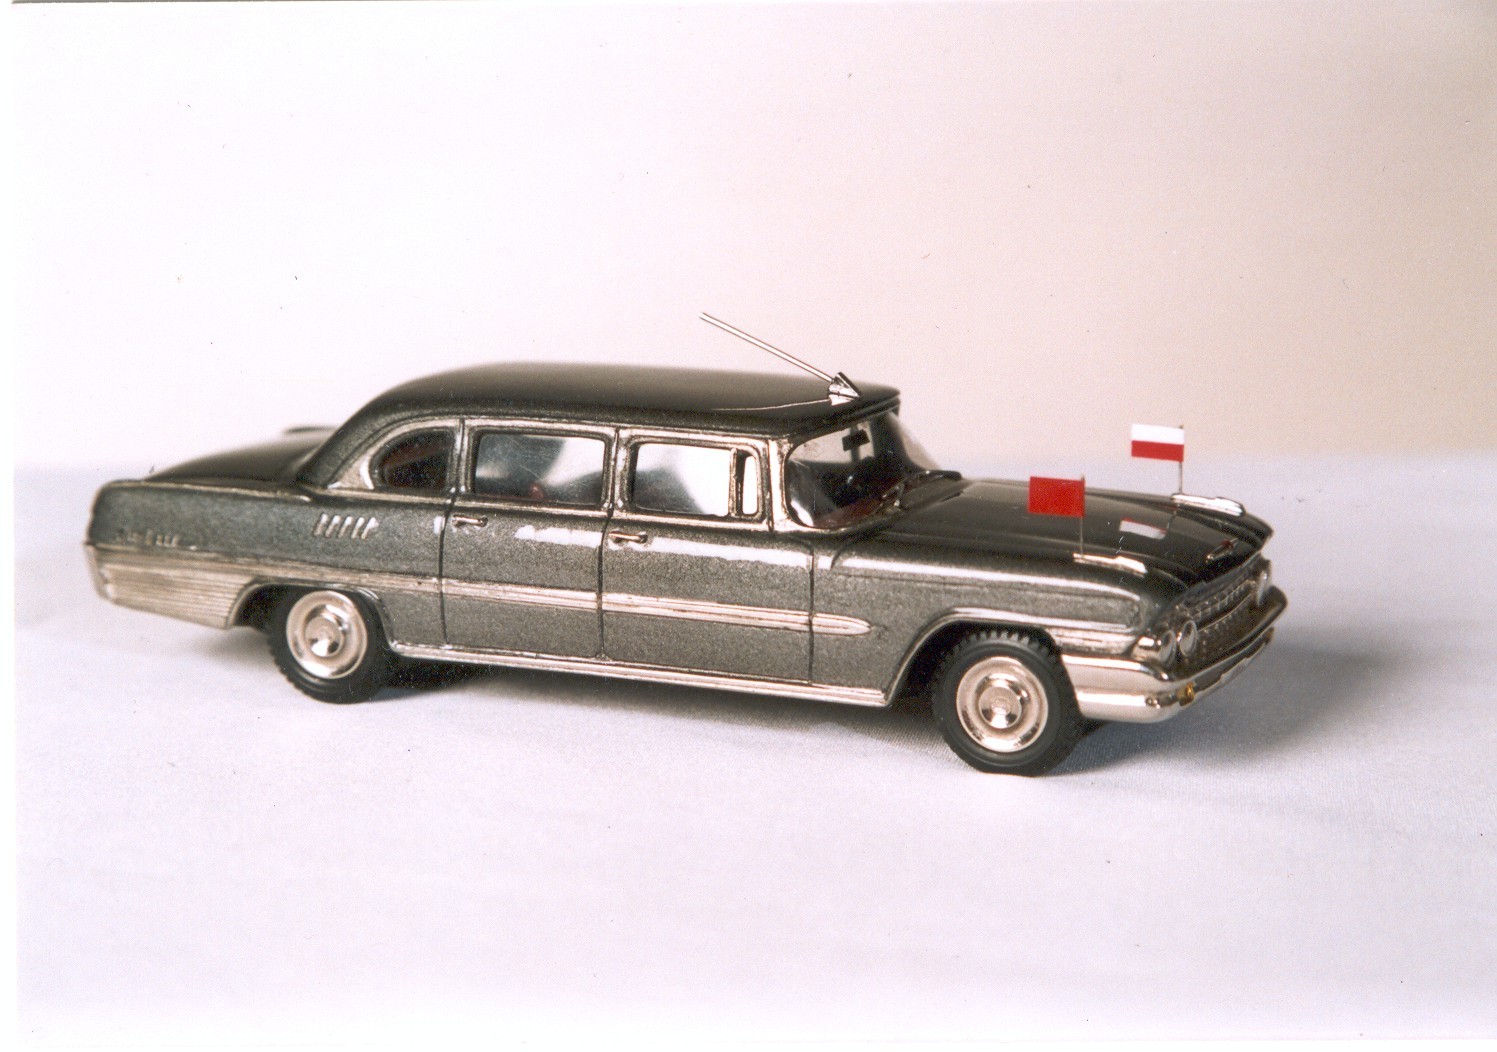 AGD: ZiL 111G (101) in 1:43 scale - mDiecast